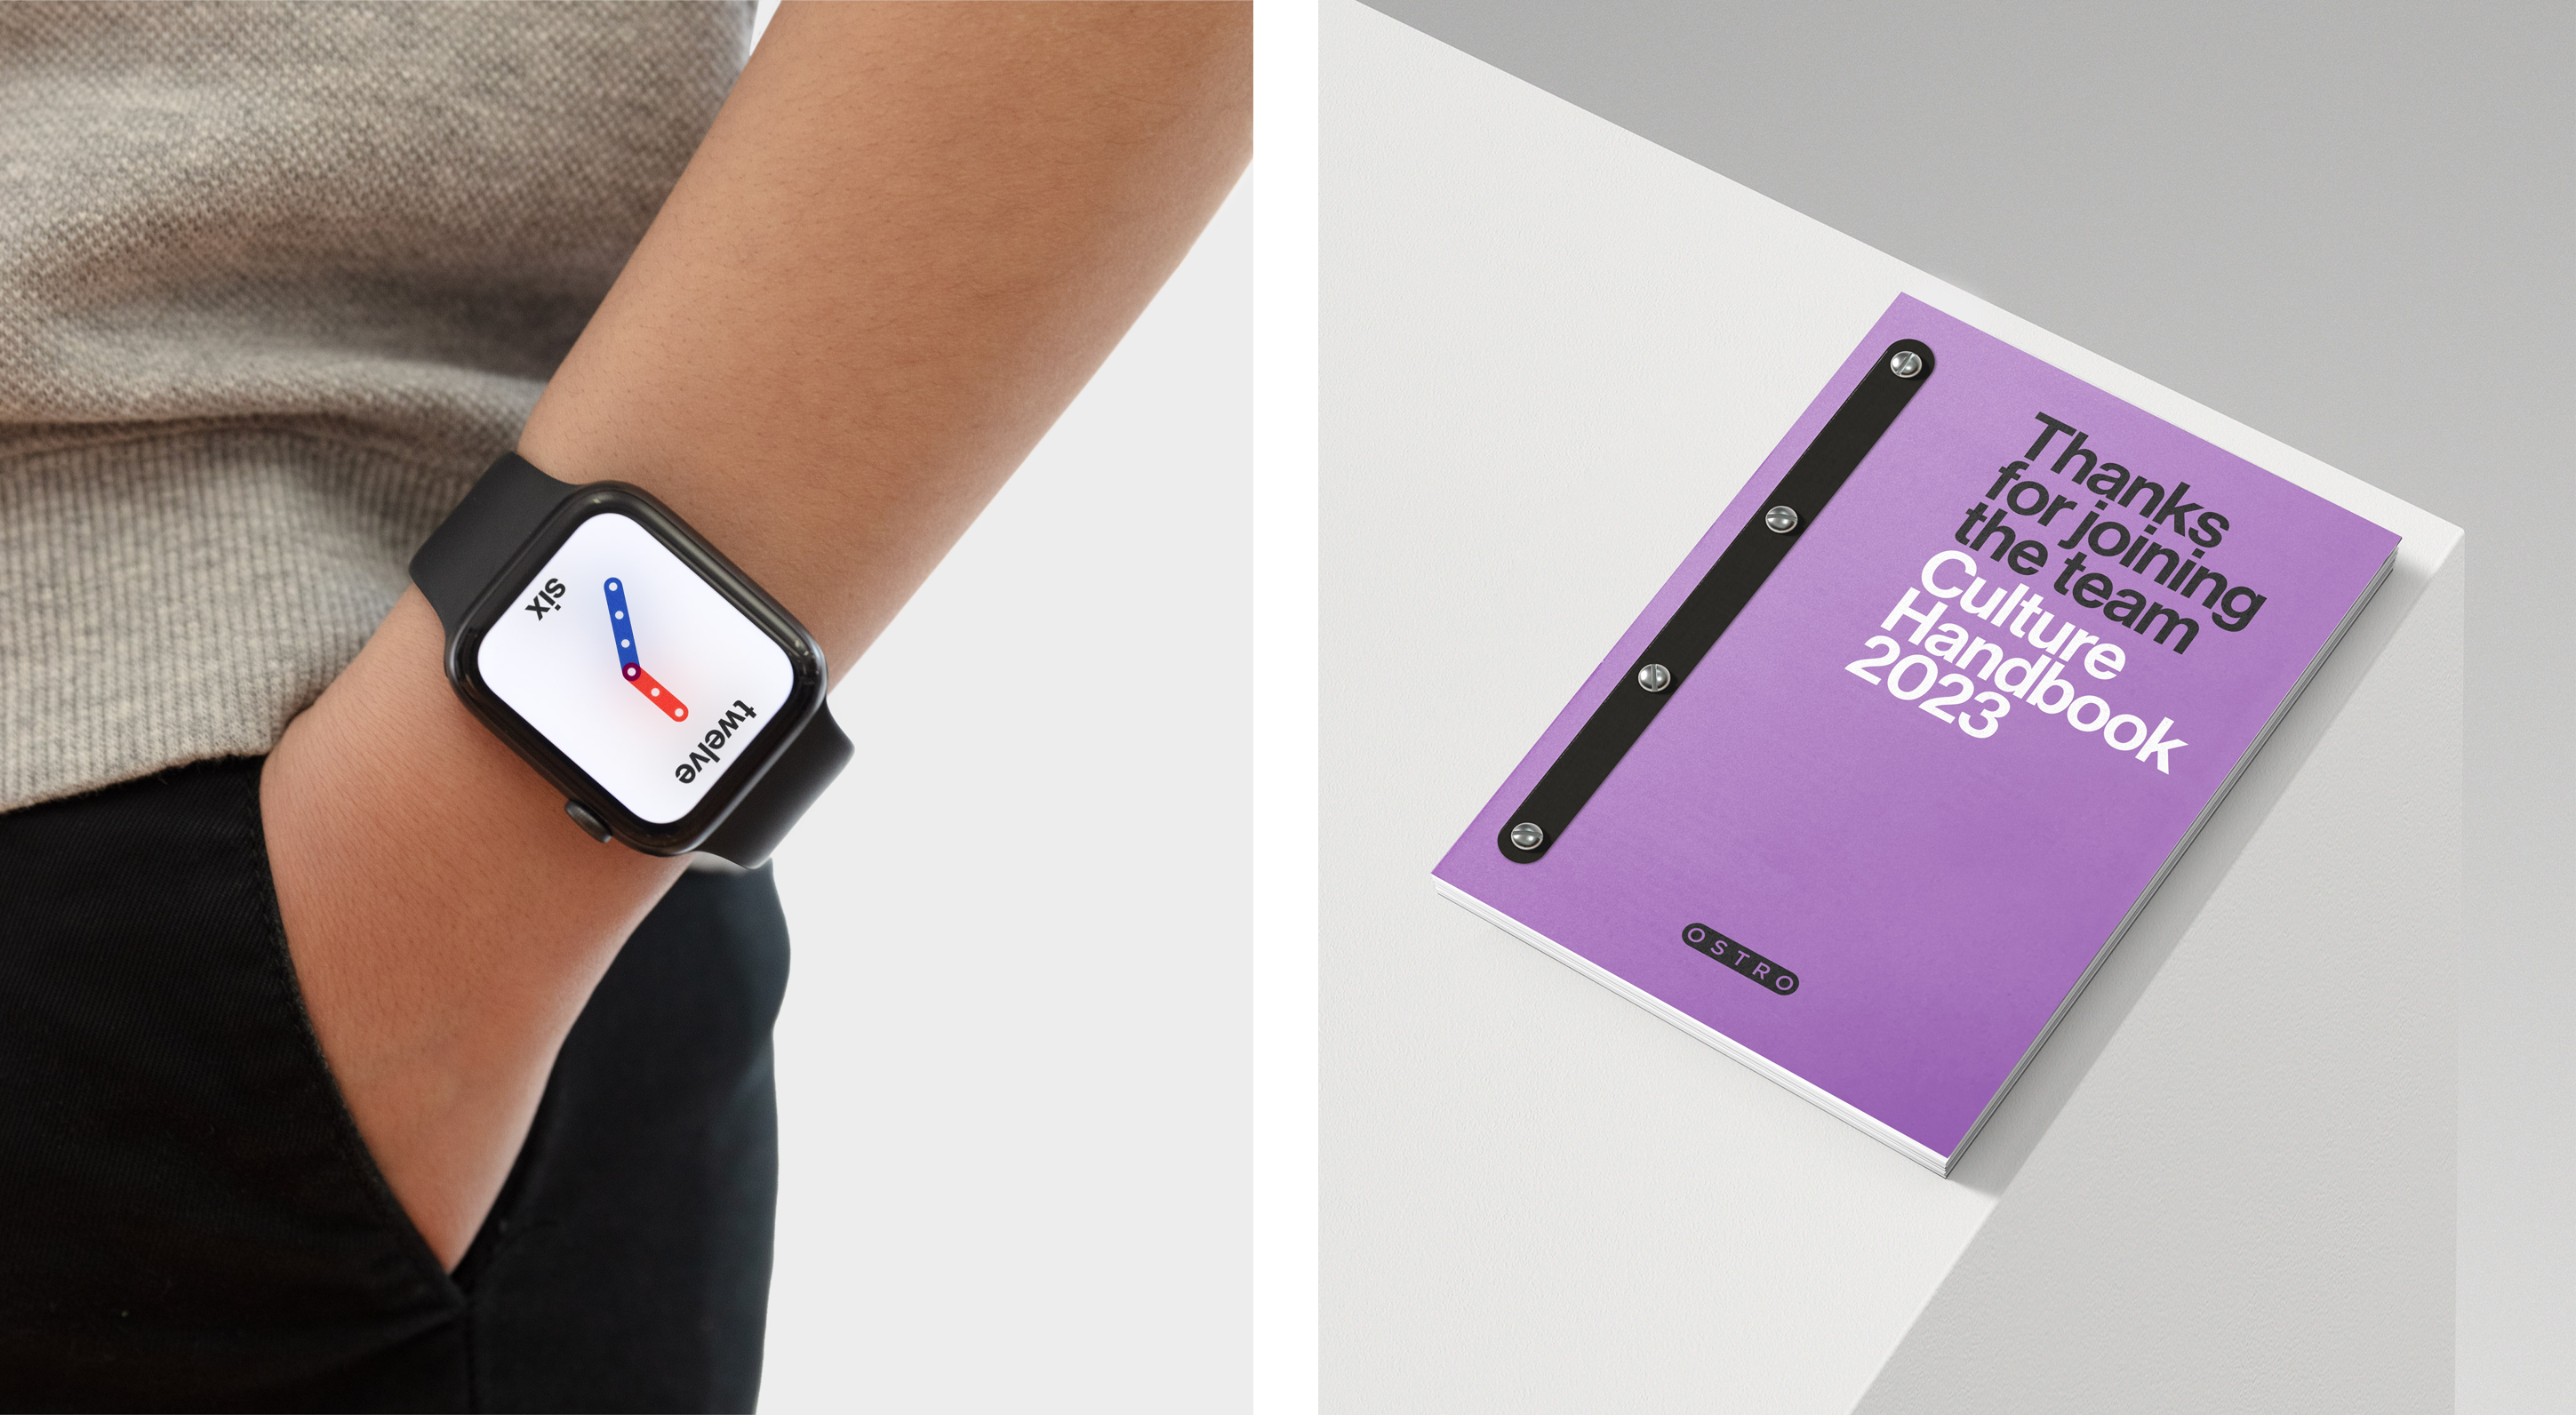 Apple watch face and culture handbook designed by Mucho for American life science software company Ostro.